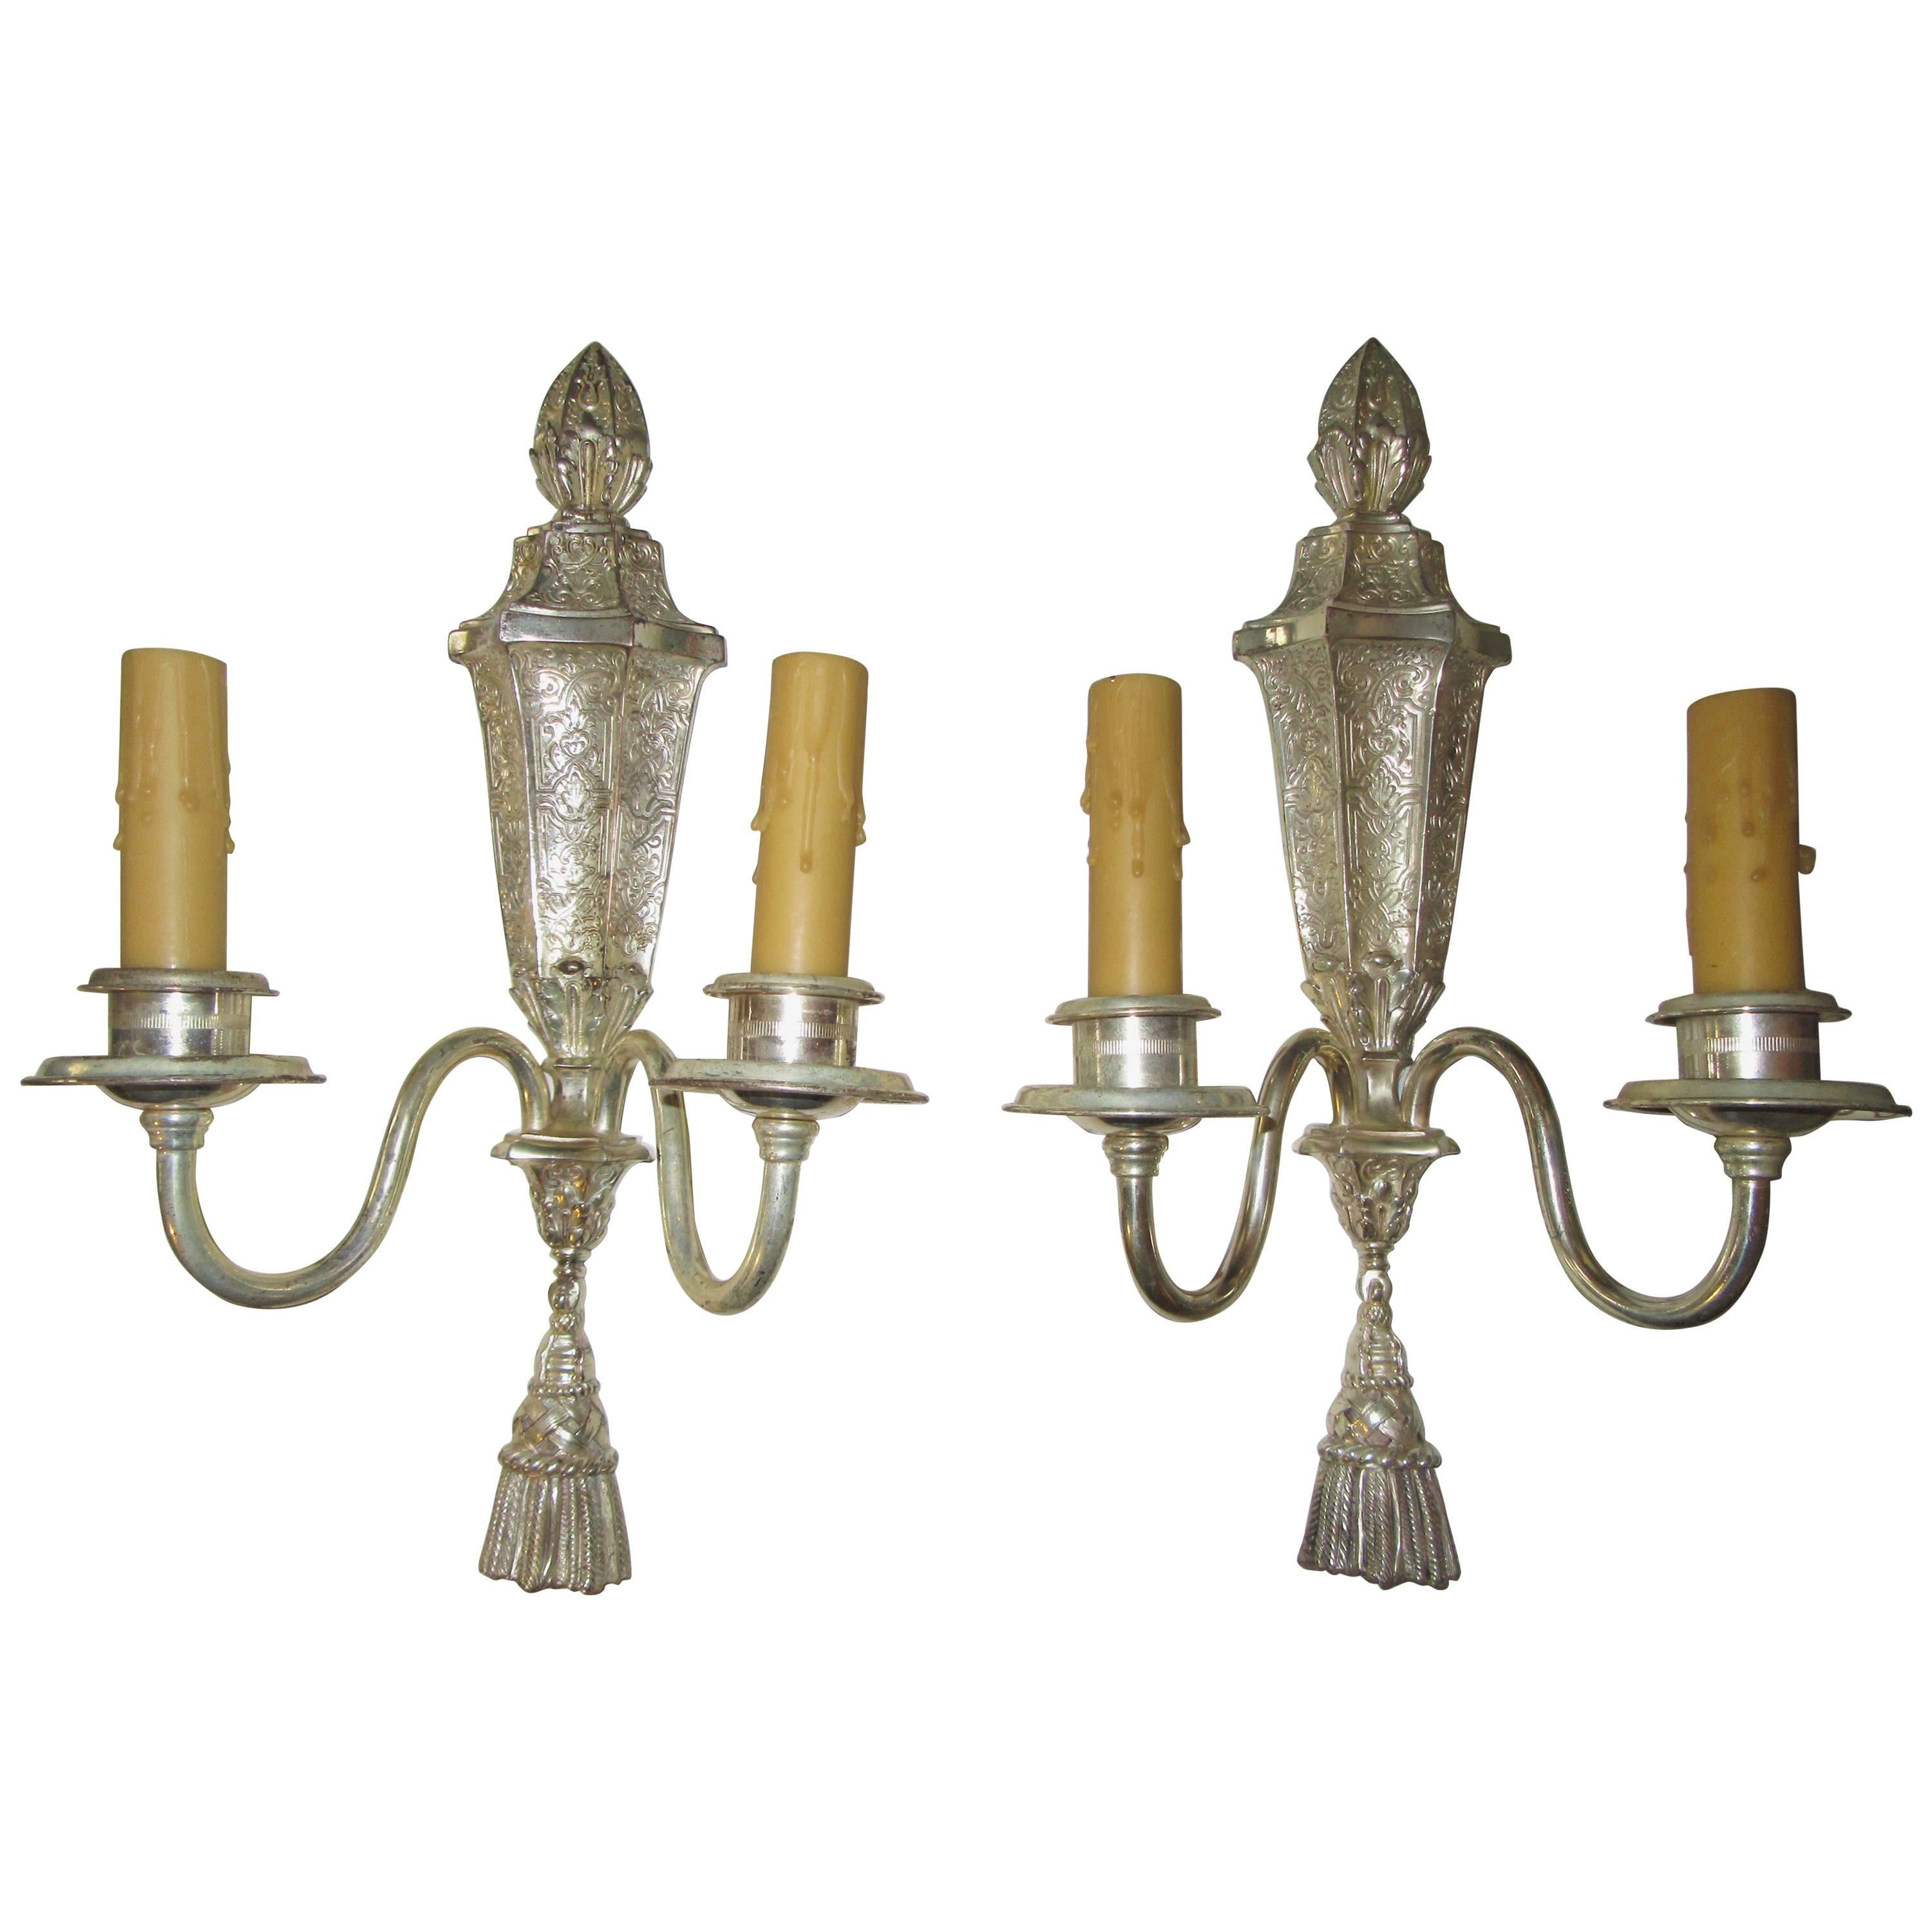 Pair of Georgian Style Silver Plate Wall Sconces by Edward F. Caldwell & Co